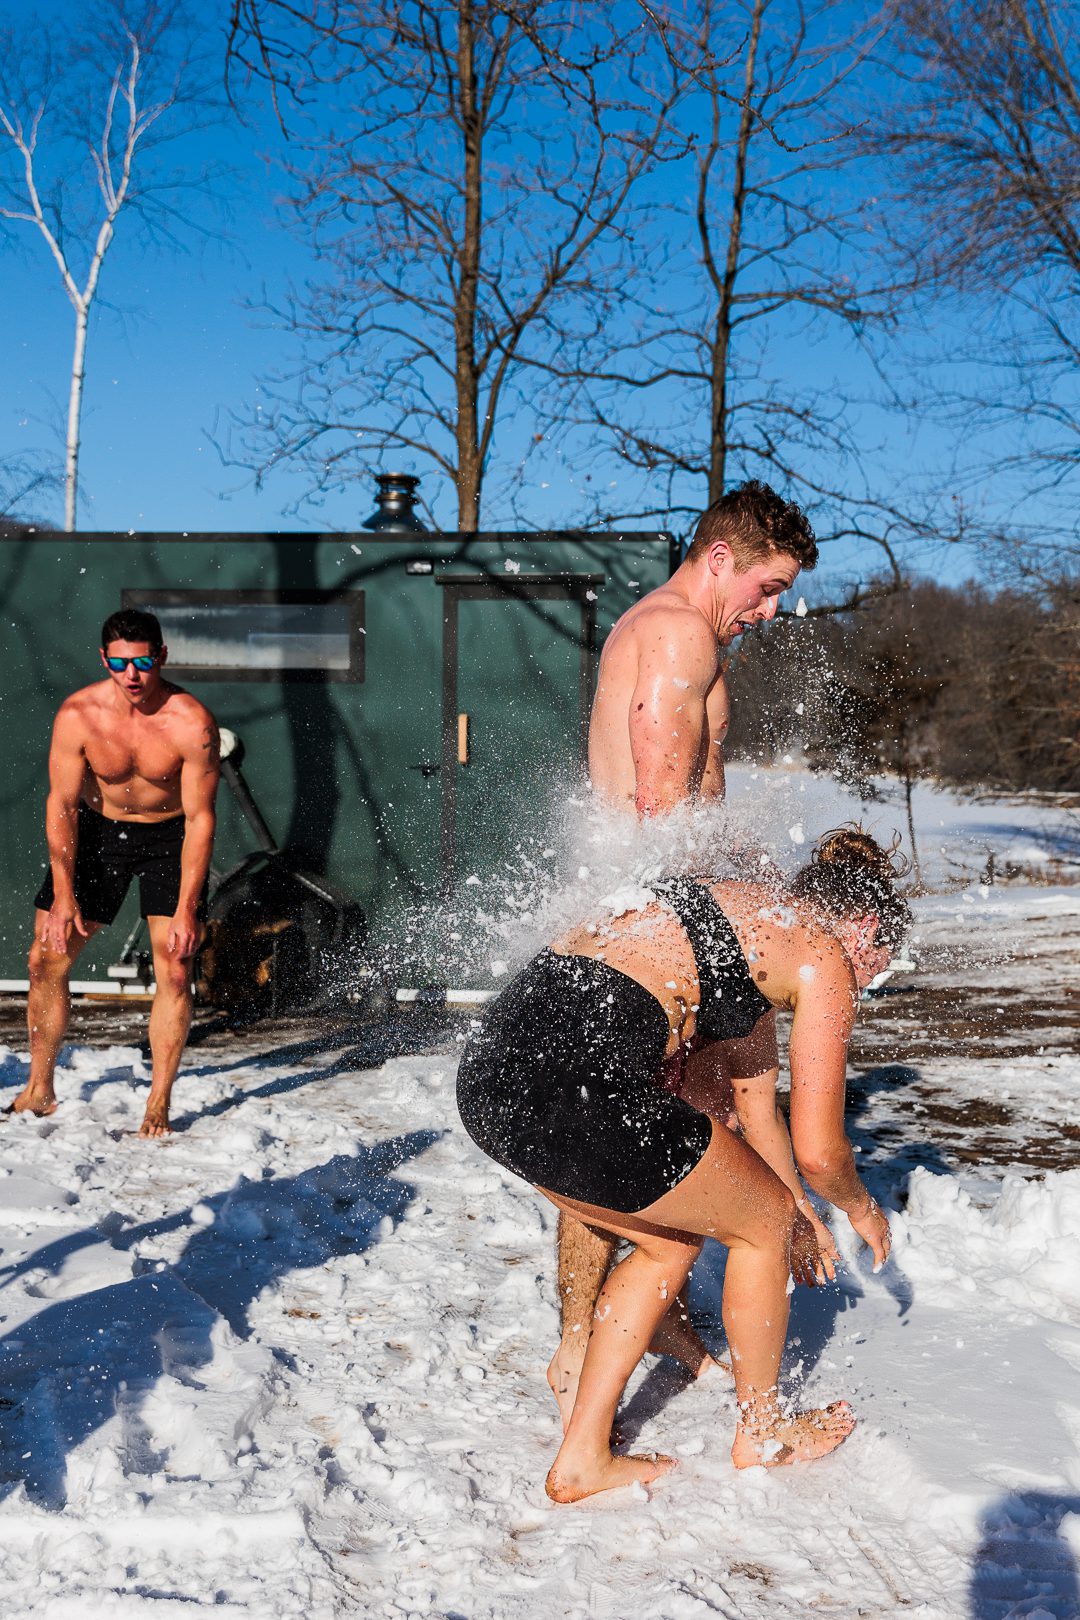 Sauna party in Minnesota during winter